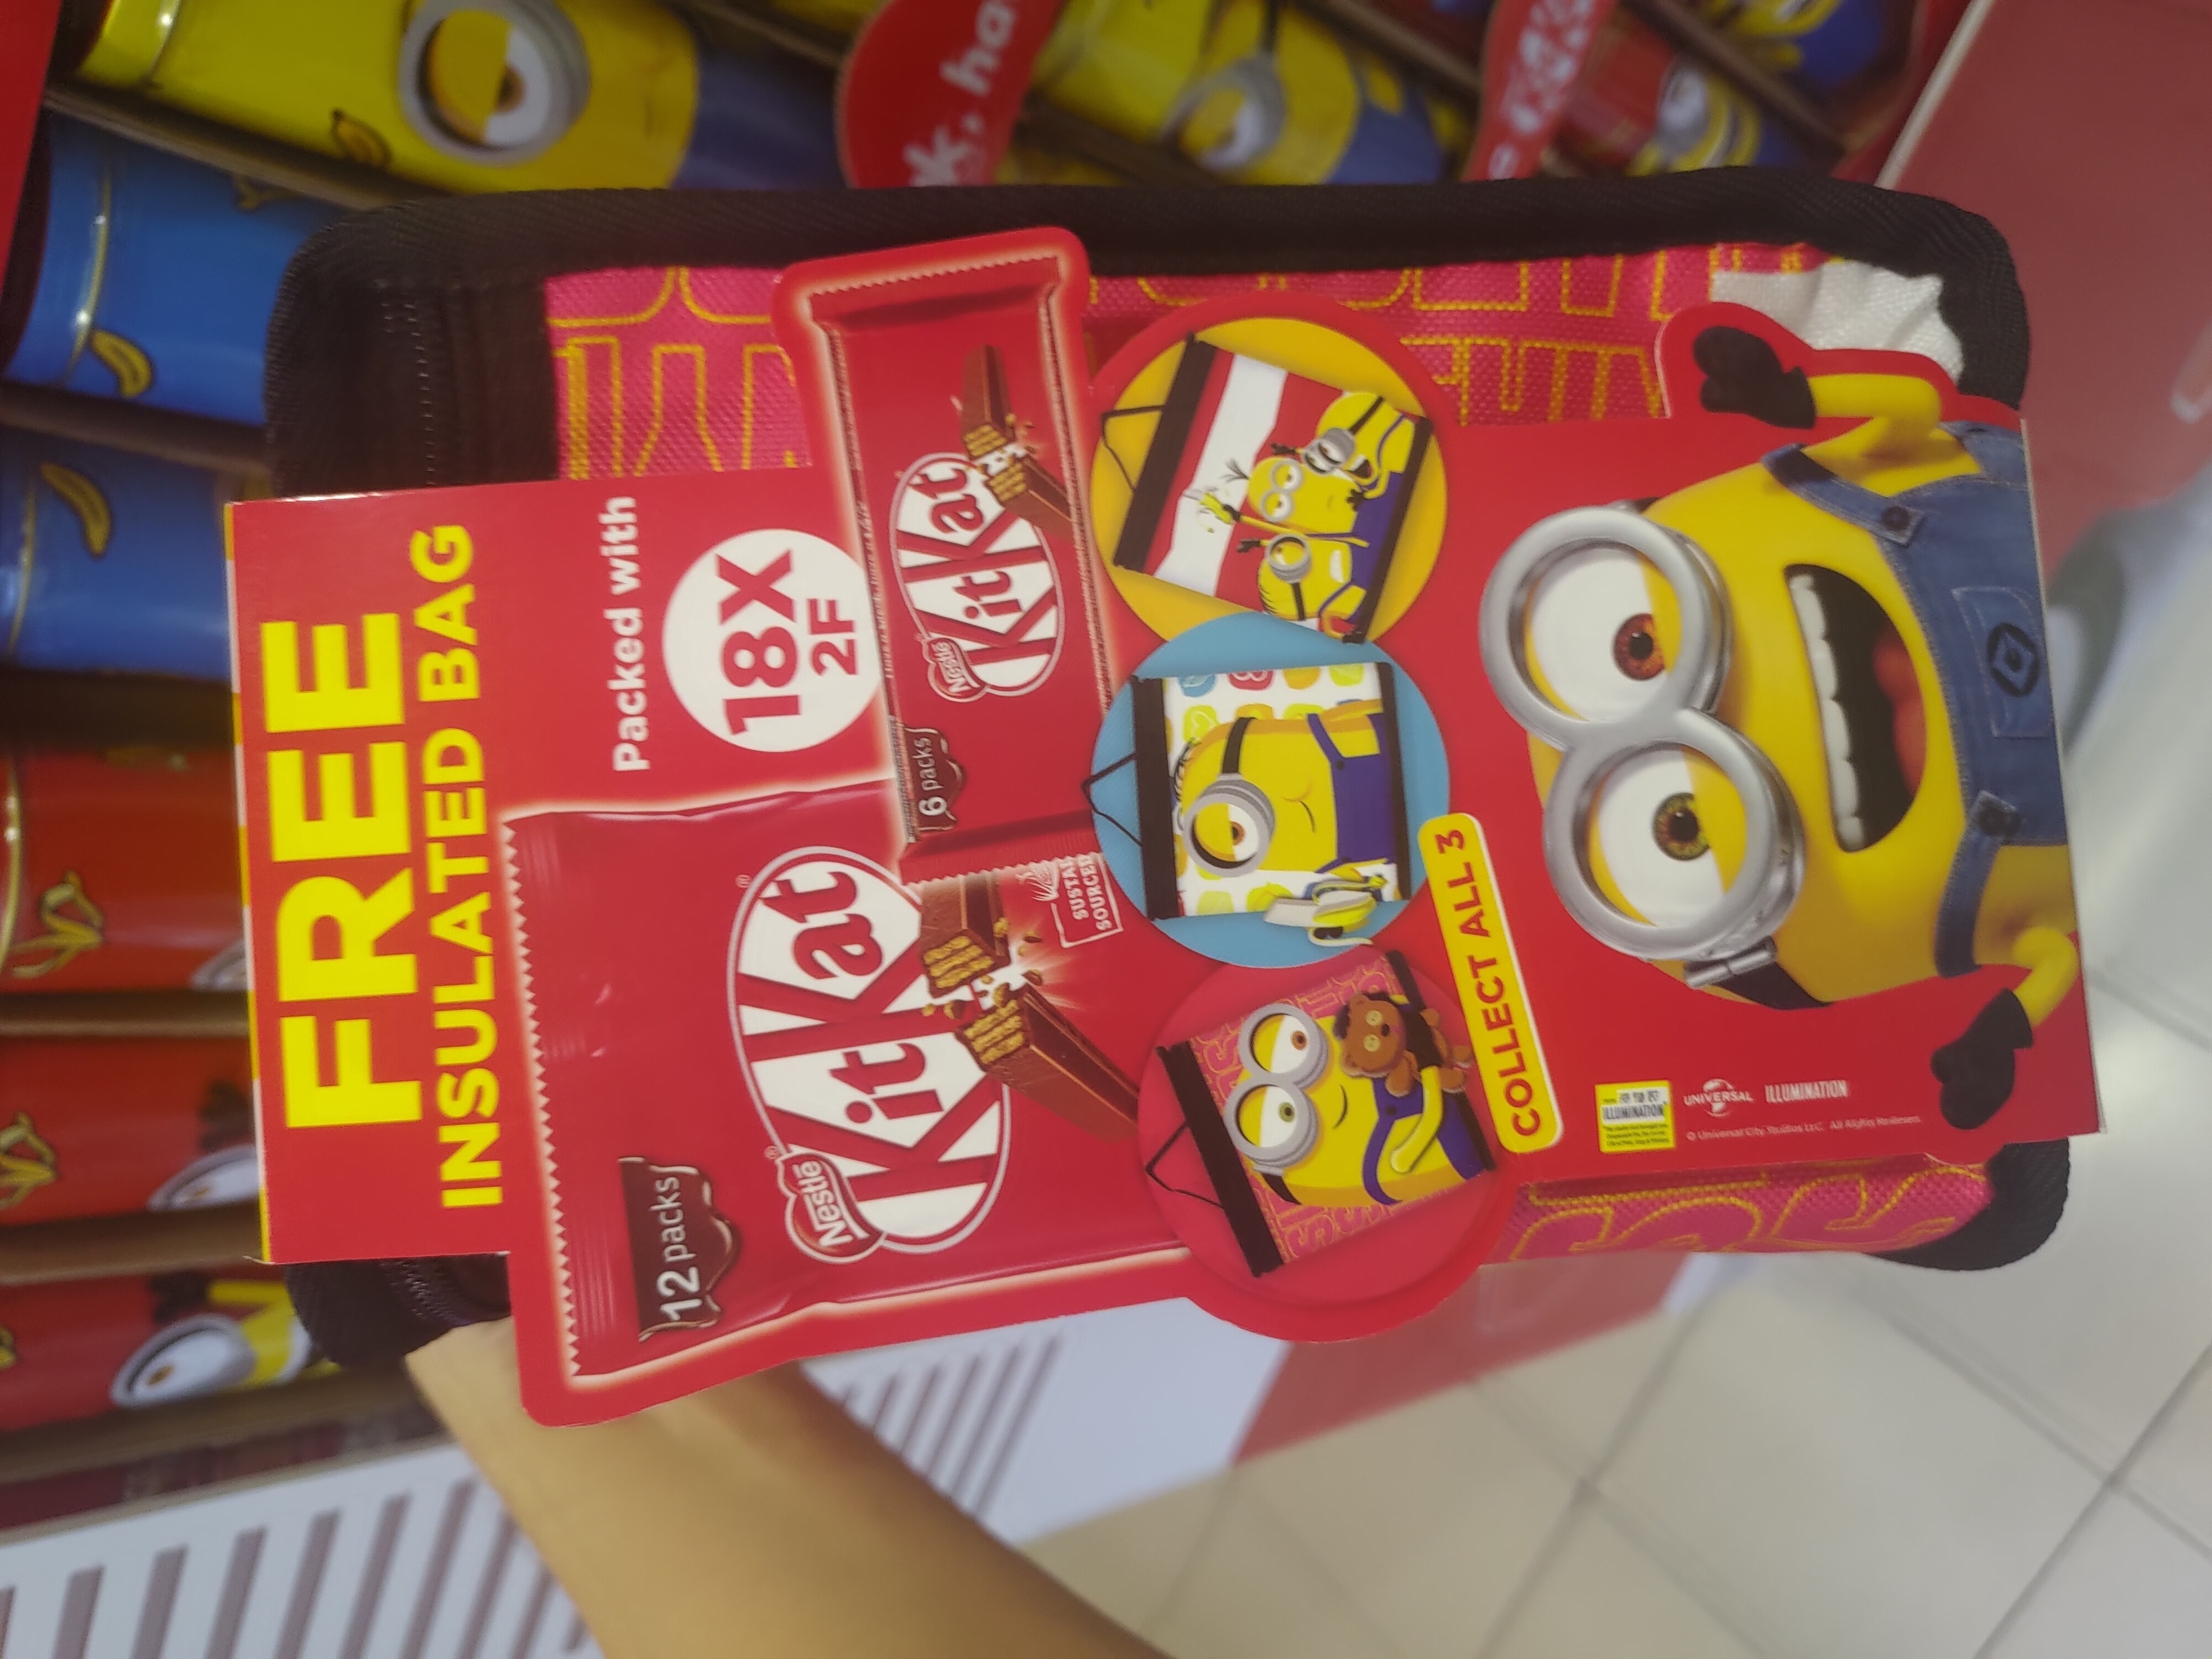 Free Limited Edition Minion Cooler Bag when you purchase Kit Kat at FairPrice - 9